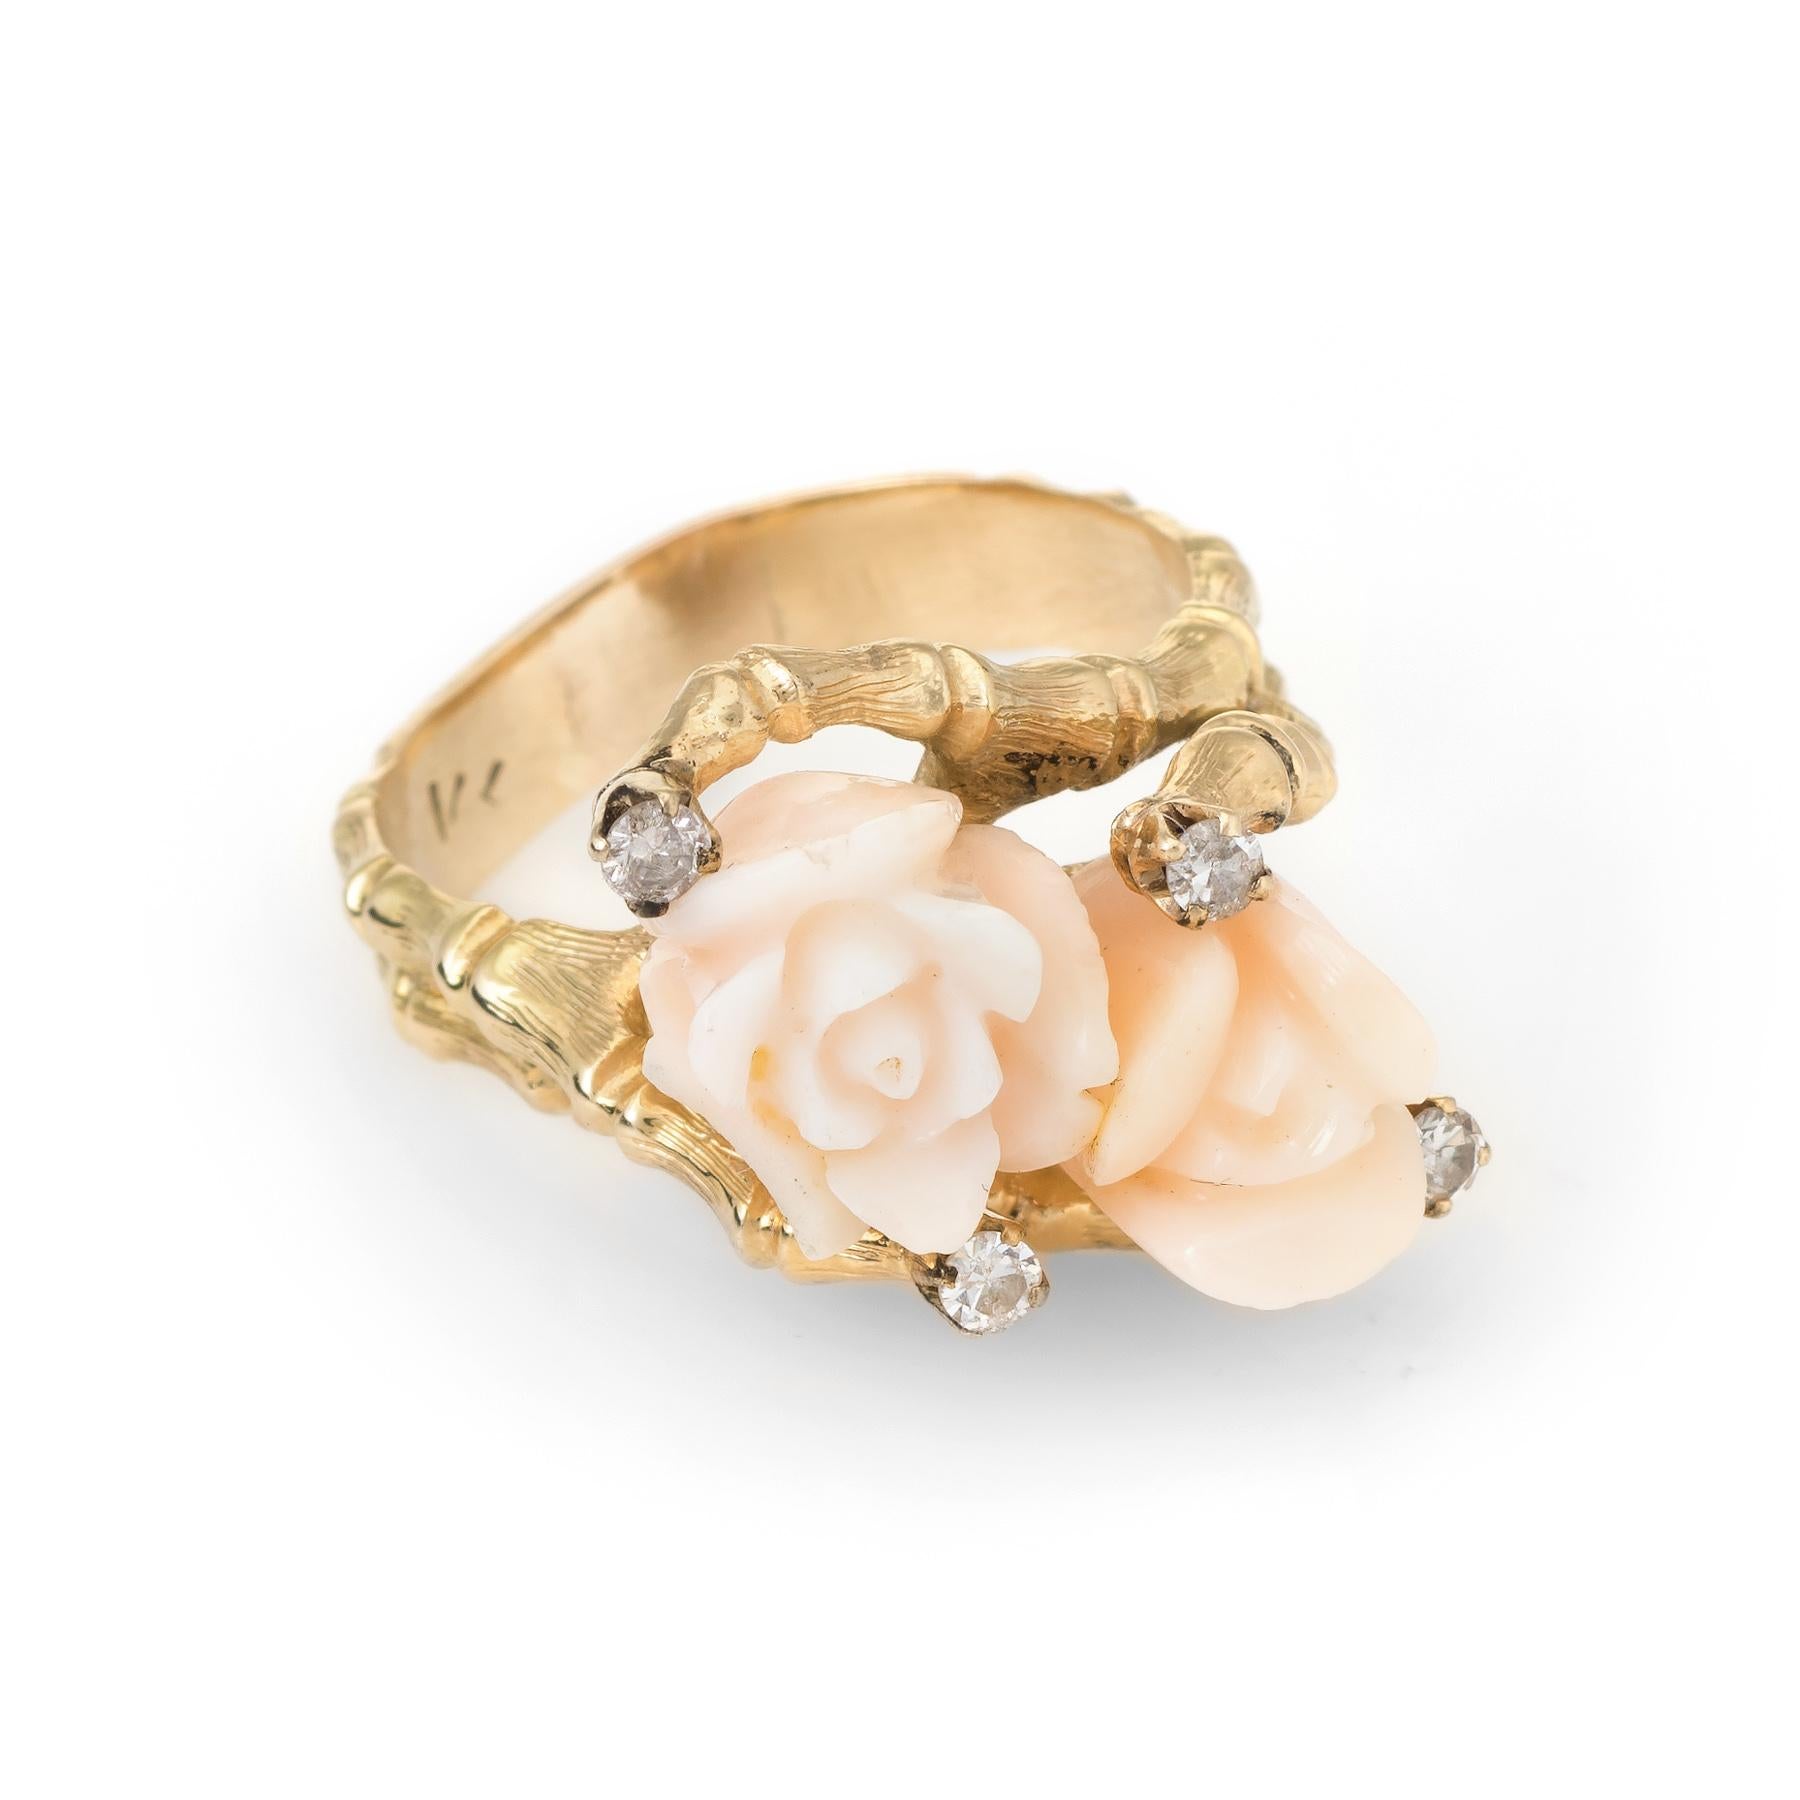 Finely detailed vintage cocktail ring (circa 1960s to 1970s), crafted in 14 karat yellow gold. 

Angel skin coral is carved in the form of a rose, measuring 8mm & 9mm, accented with an estimated 0.16 carats of diamonds (estimated at H-I color and